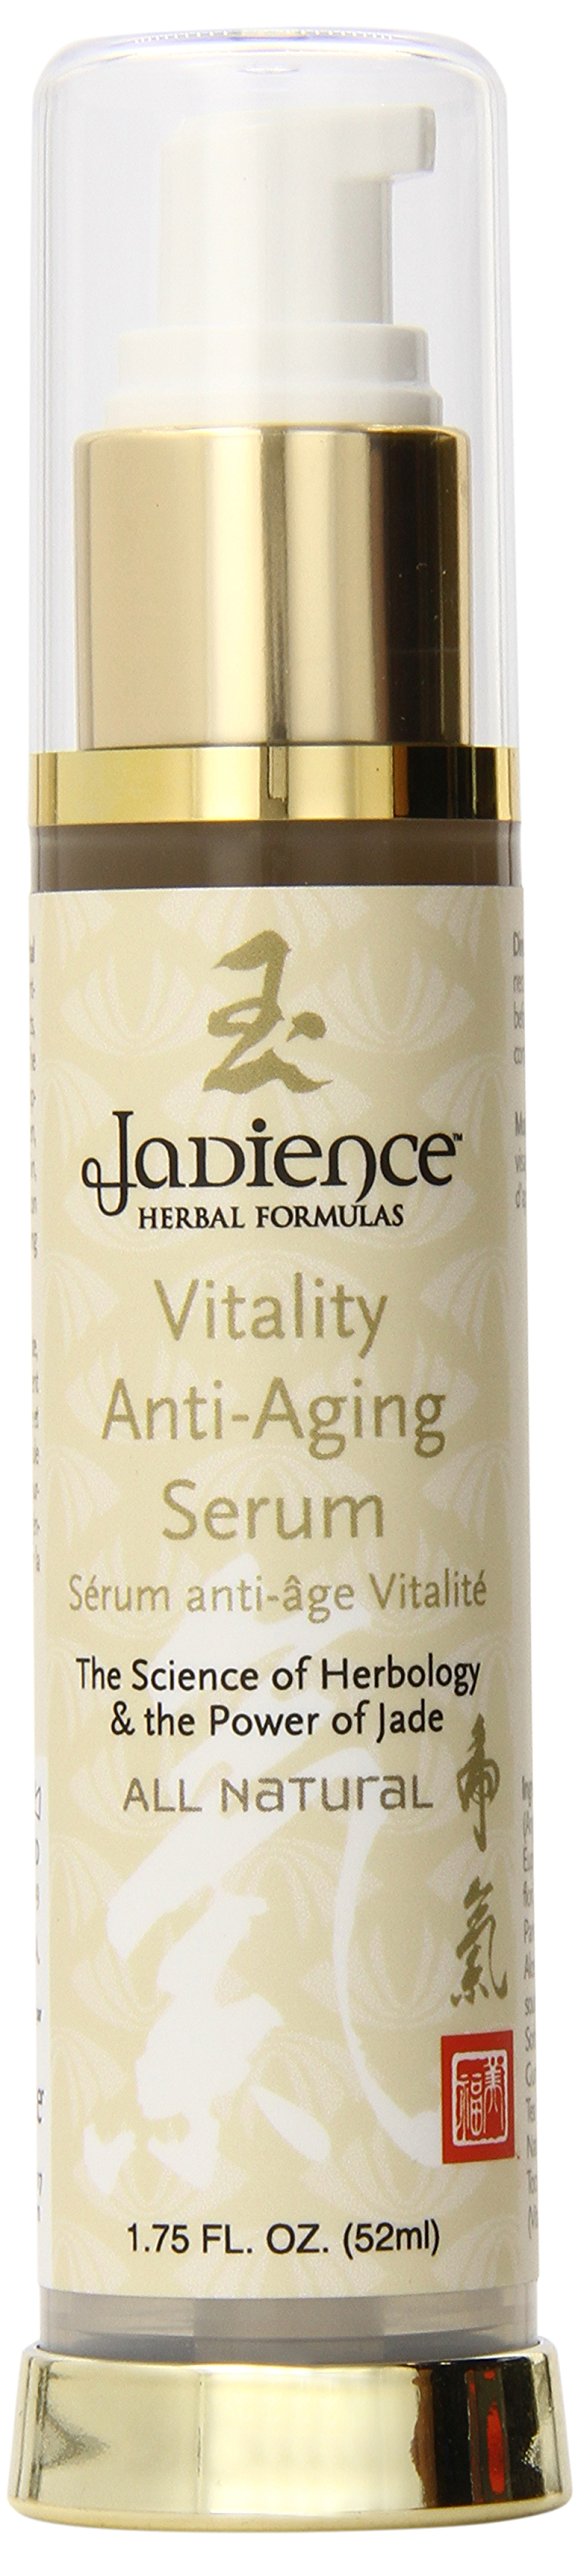 Jadience Vitality Hyaluronic Acid Anti Aging Serum For Wrinkles & Smooth Facial Fine Lines | 1.75 Oz Brighten & Revitalize Skin & Face Tone | Intense Hydration + Moisture Paraben-free